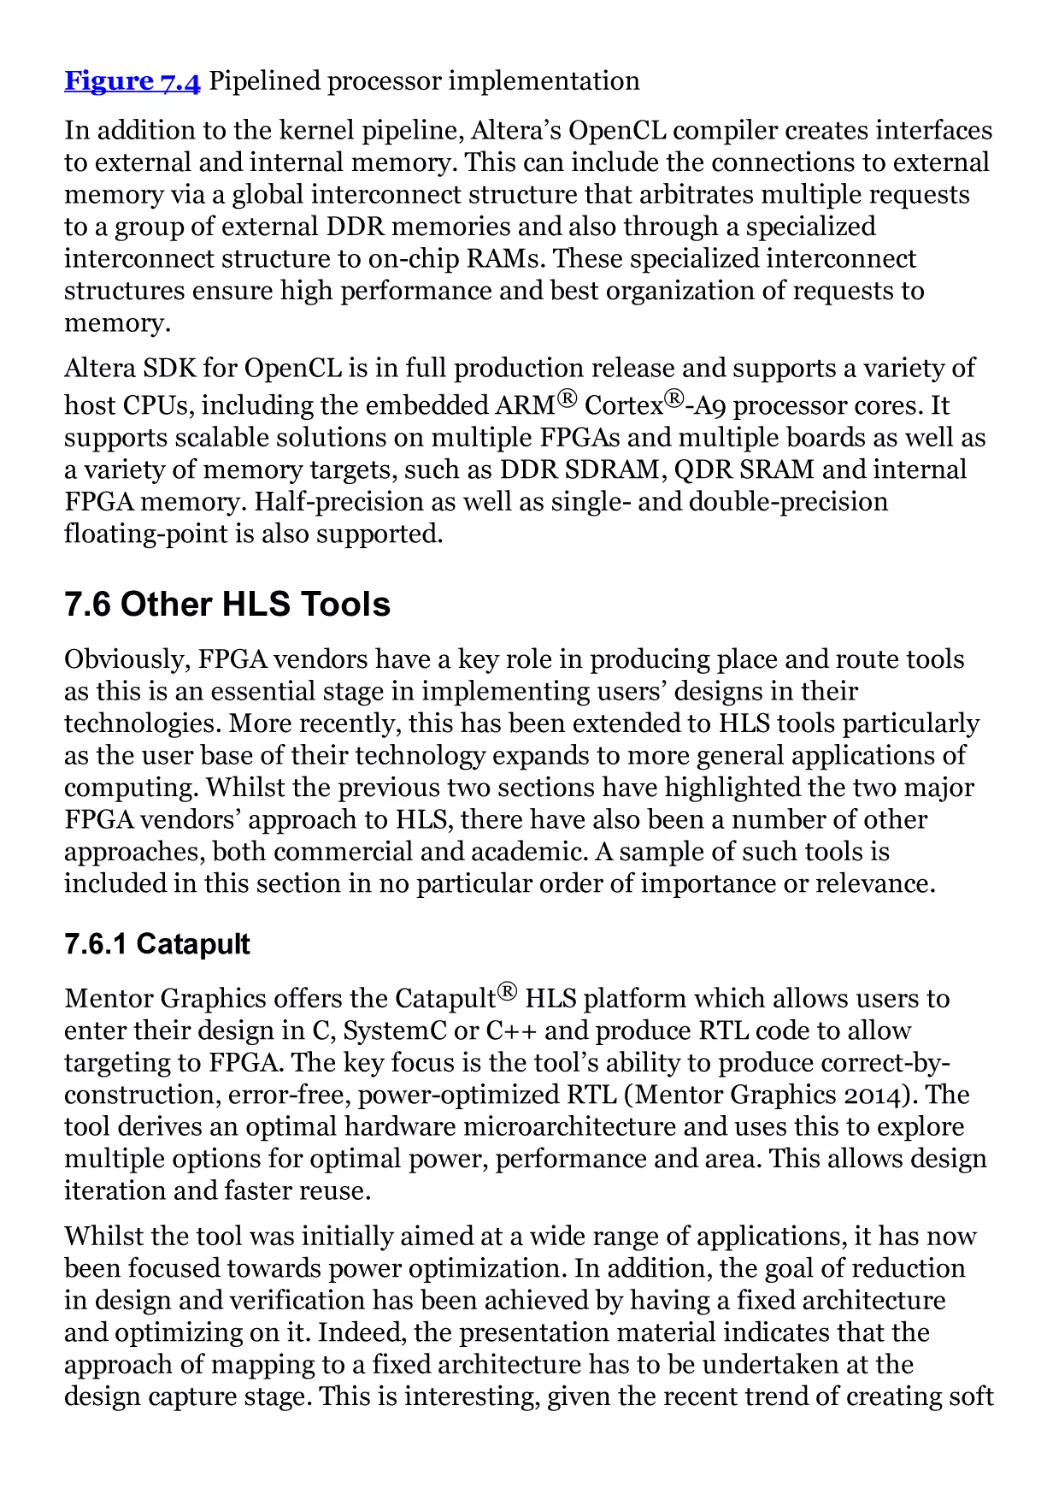 7.6 Other HLS Tools